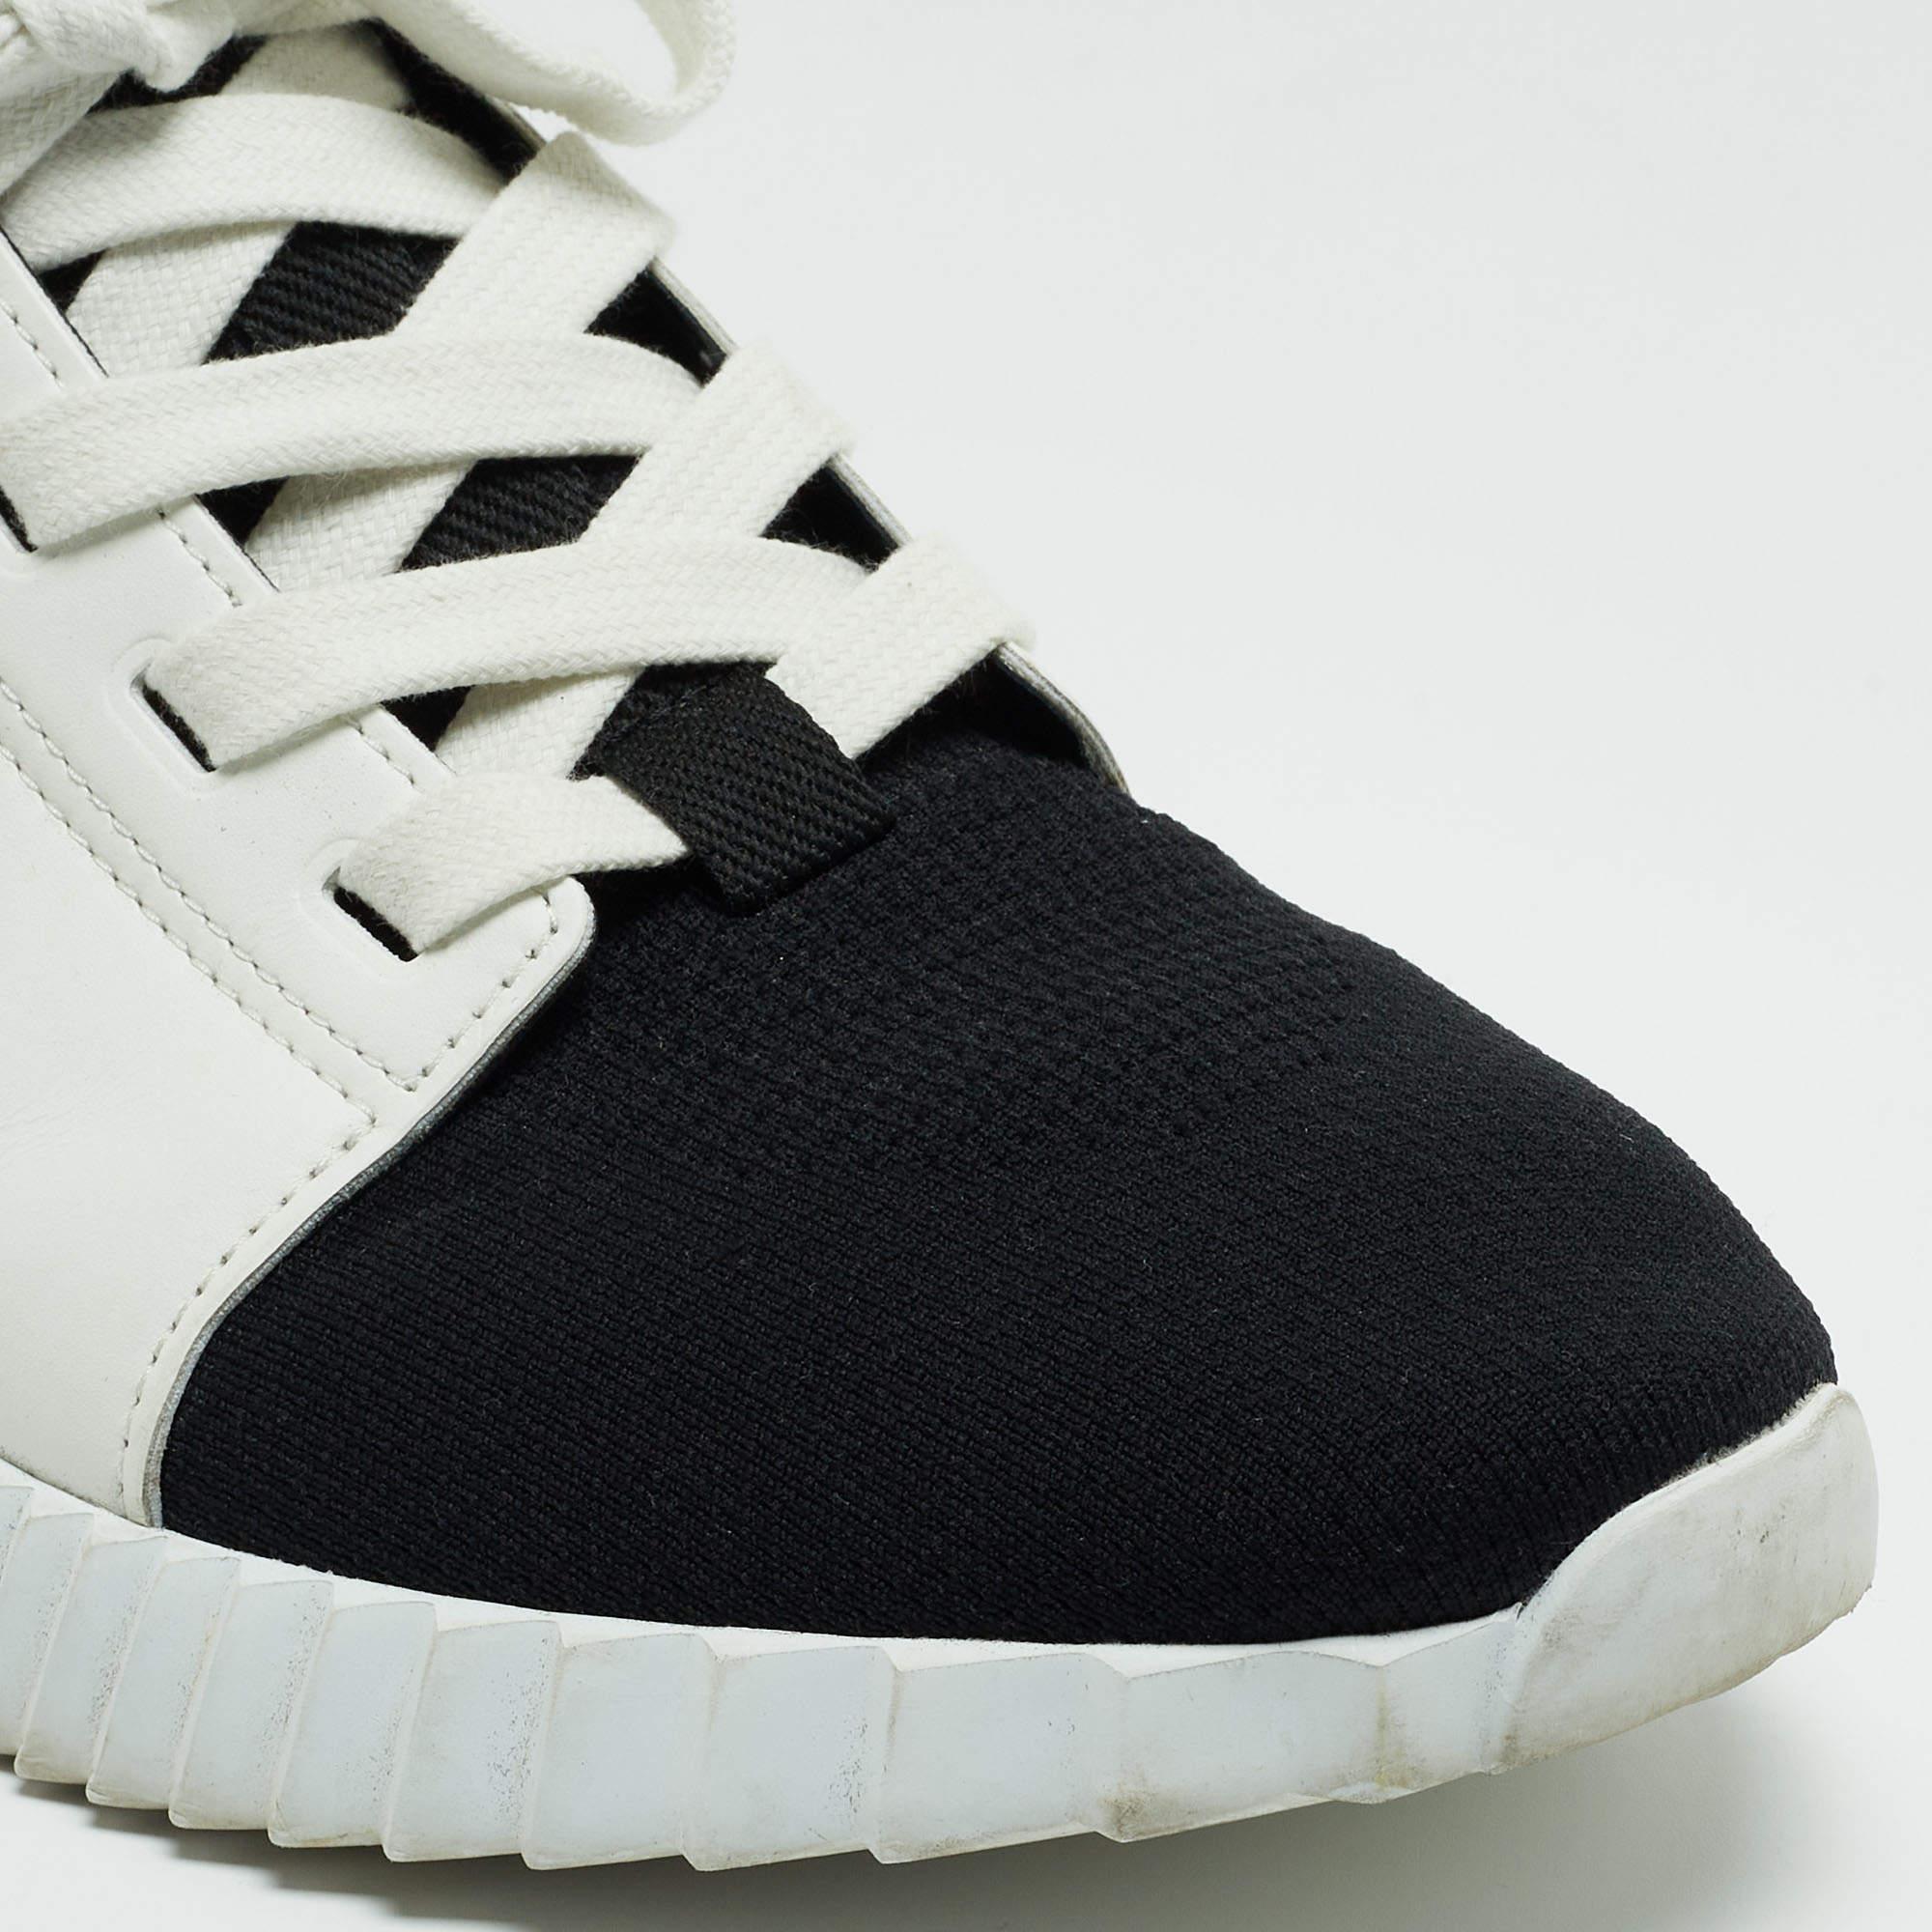 Hermes White/Black Leather and Knit Fabric Depart Sneakers Size 42 2